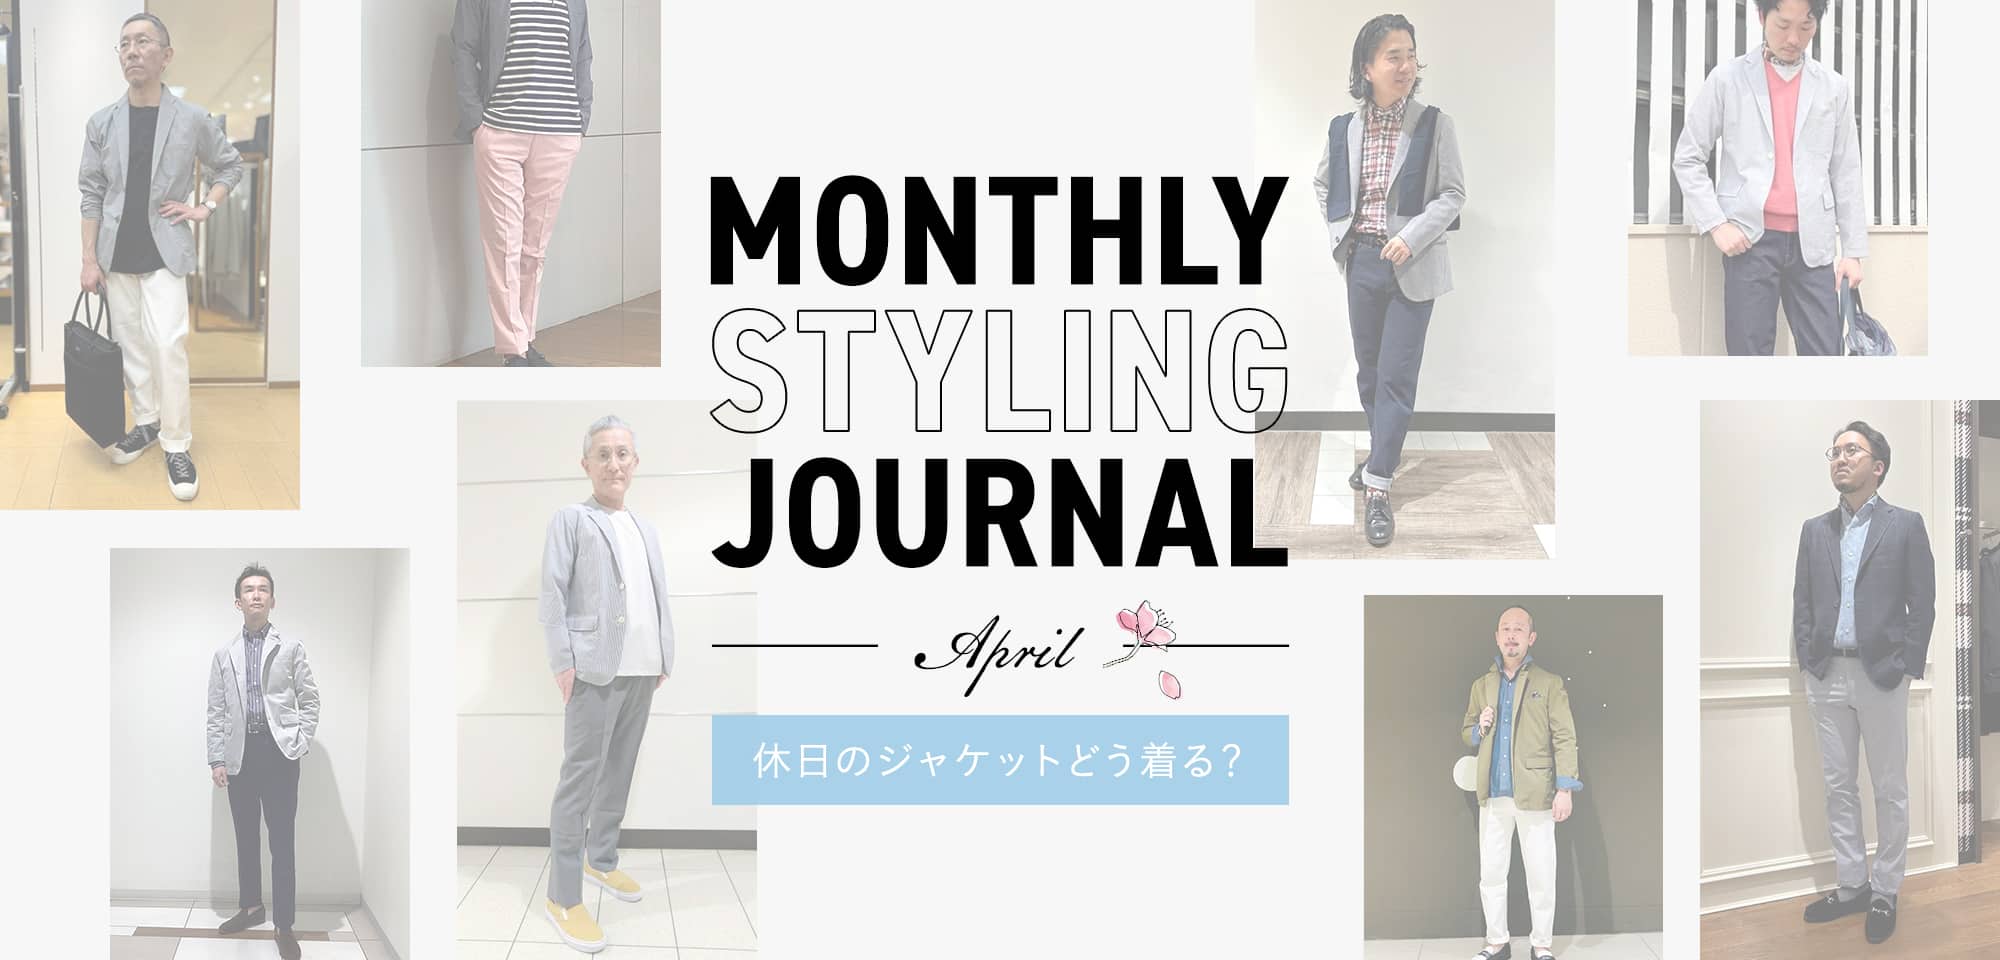 MEN_Monthly Styling Journal_april